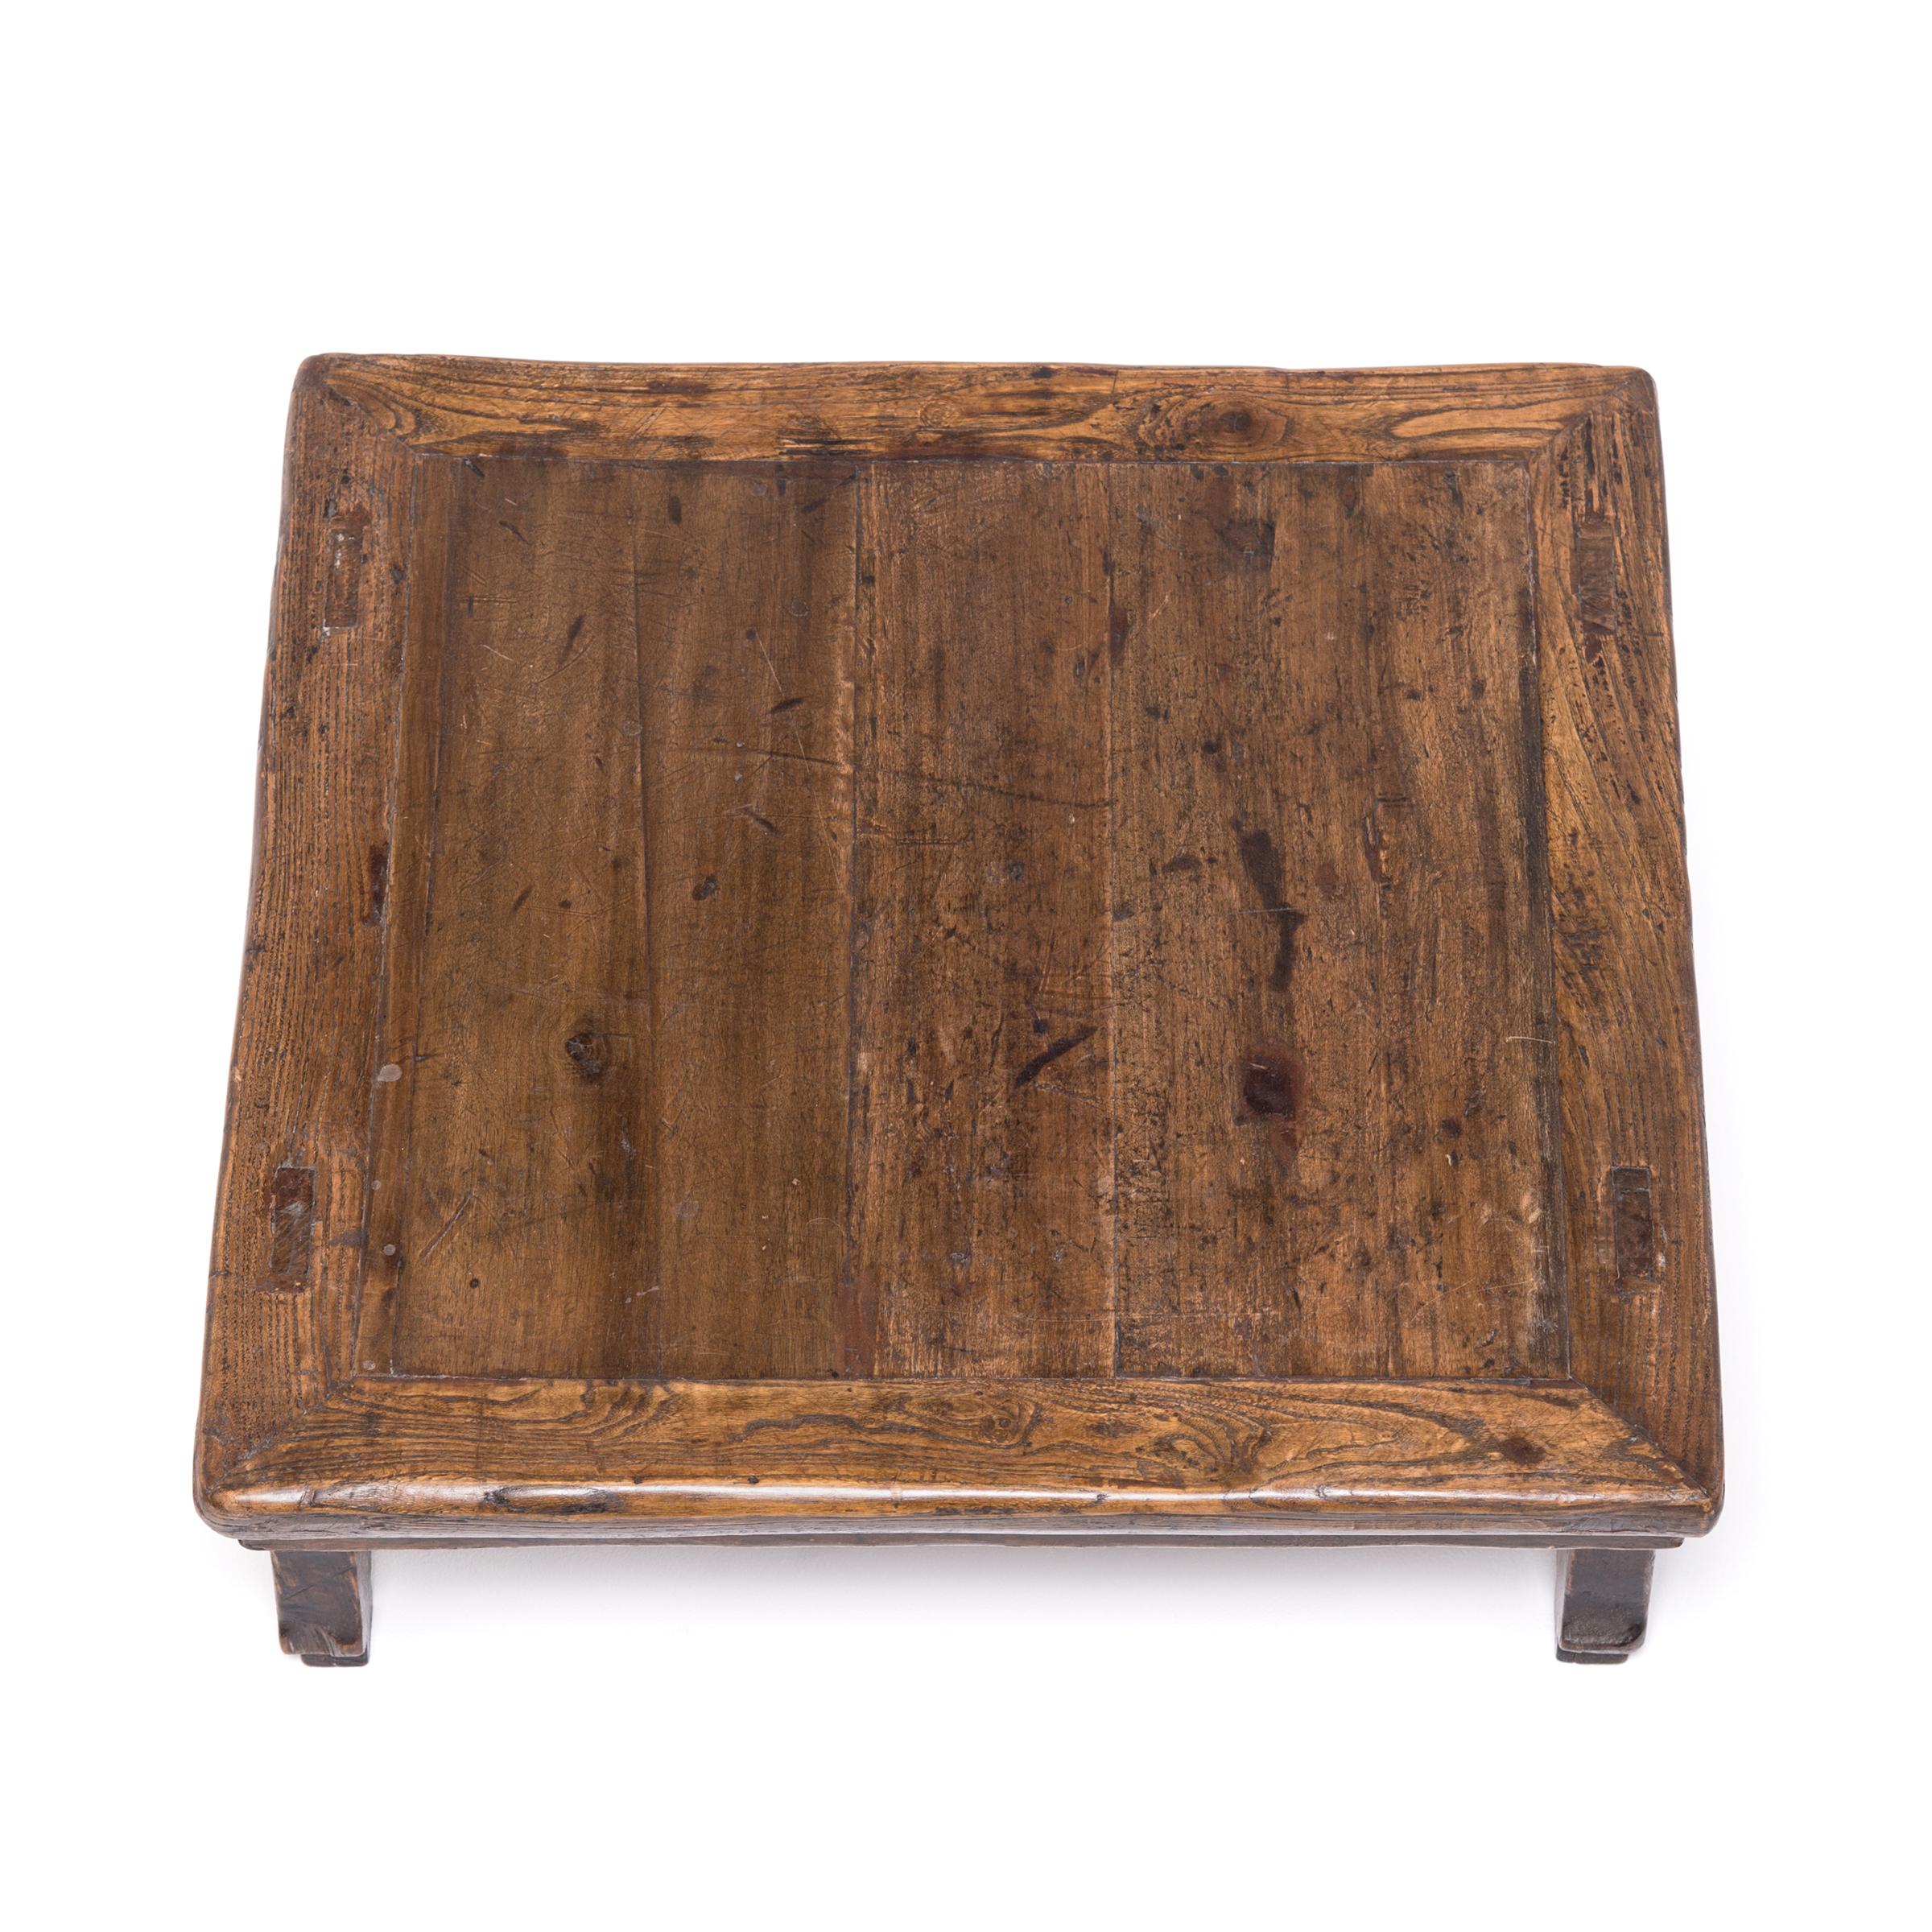 This lovely, low-profile table once served up wine, food, and board games to guests who sat or reclined on a platform or floor. Made of Chinese northern elmwood (yumu), the petite table is detailed with a carved scroll apron and charming hoof feet.